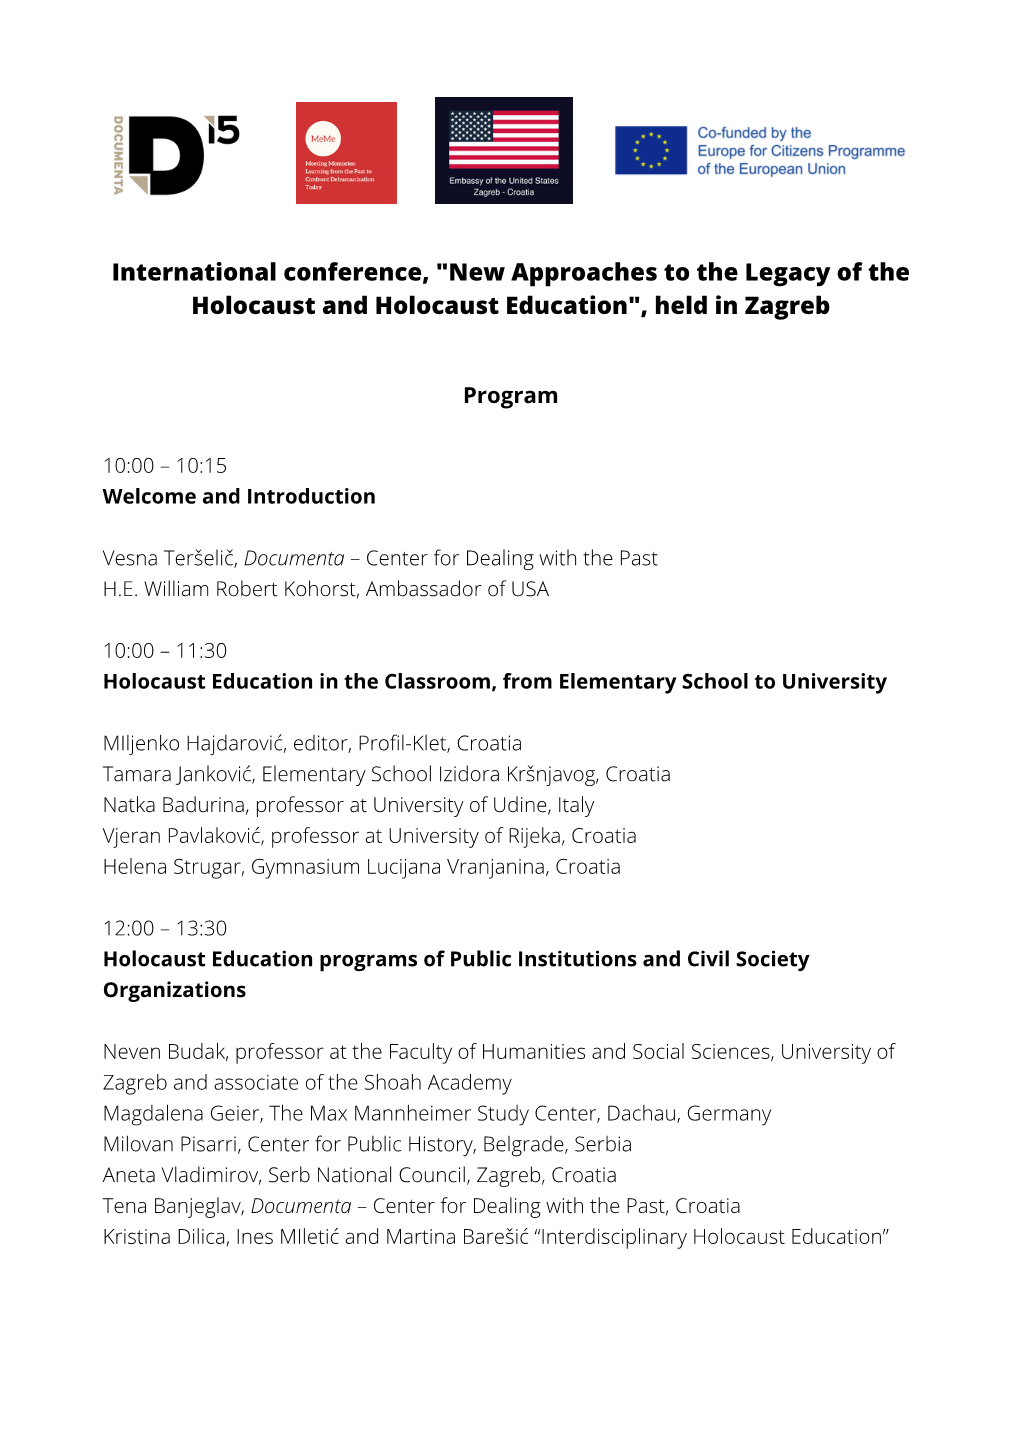 International Conference, "New Approaches to the Legacy of the Holocaust and Holocaust Education", Held in Zagreb